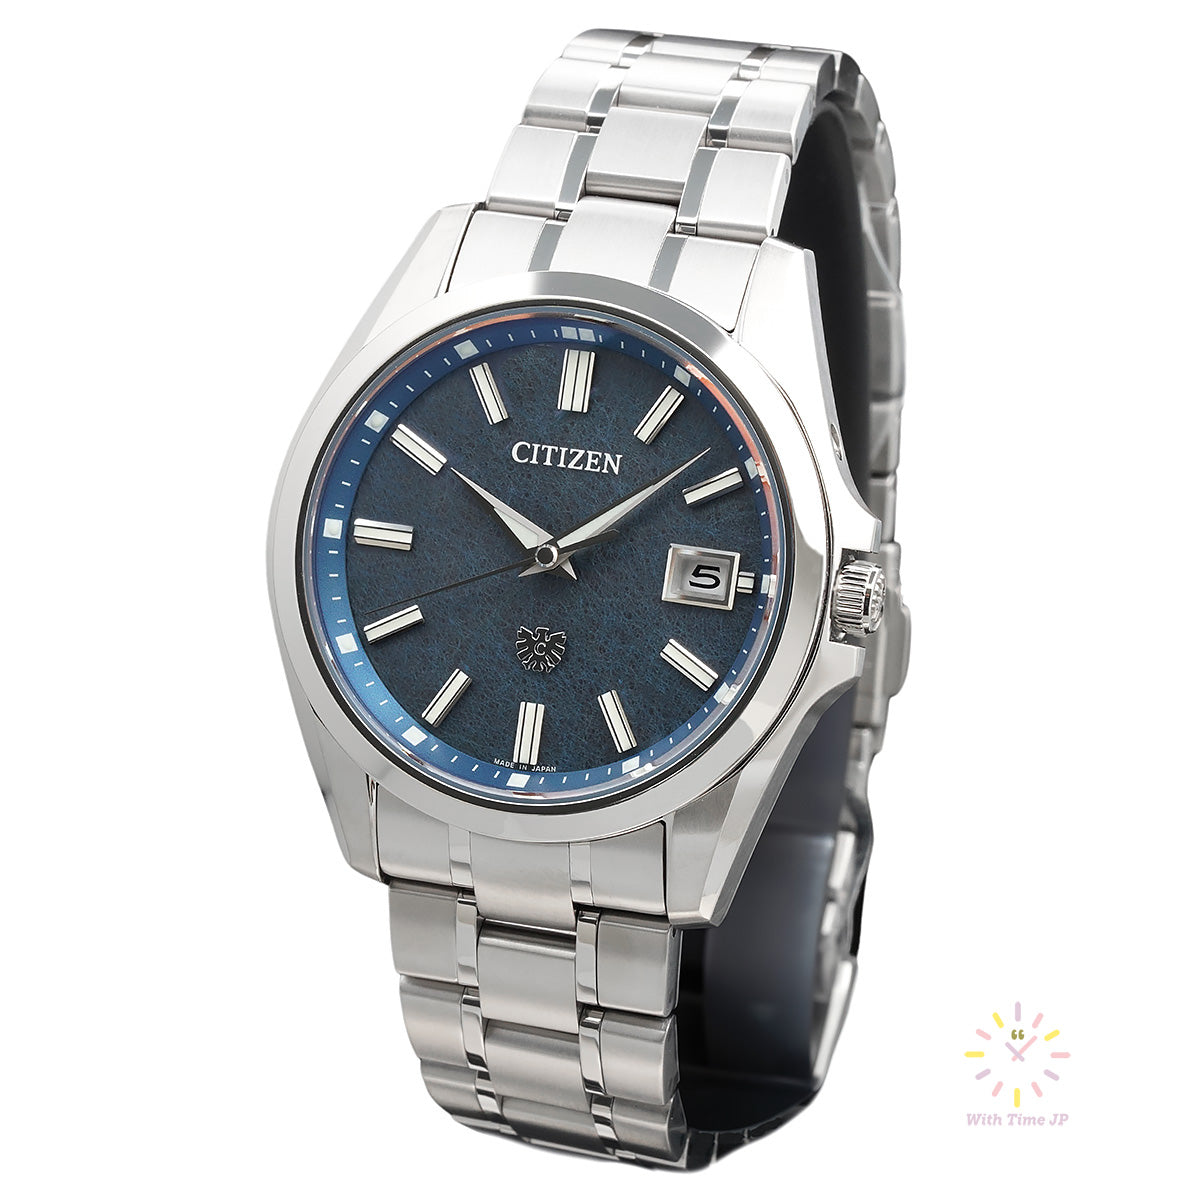 Seiko 5 Sports Day Date Automatic SBSA197 – With Time JP